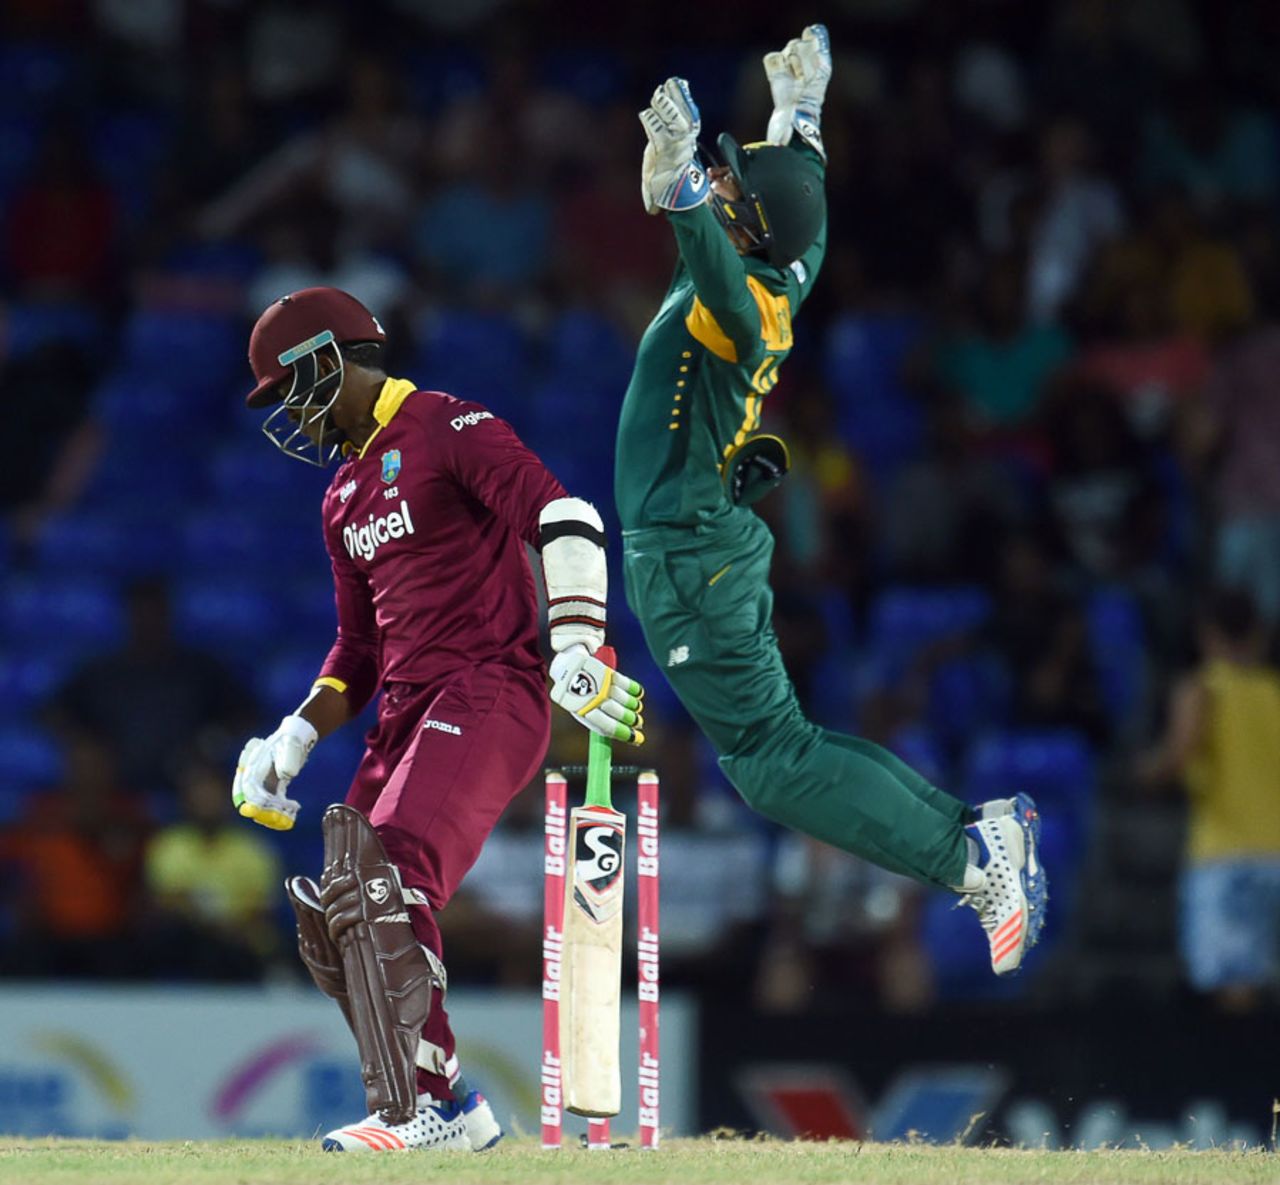 Quinton de Kock takes the catch to dismiss Marlon Samuels, West Indies v South Africa, 6th match, ODI tri-series, St Kitts